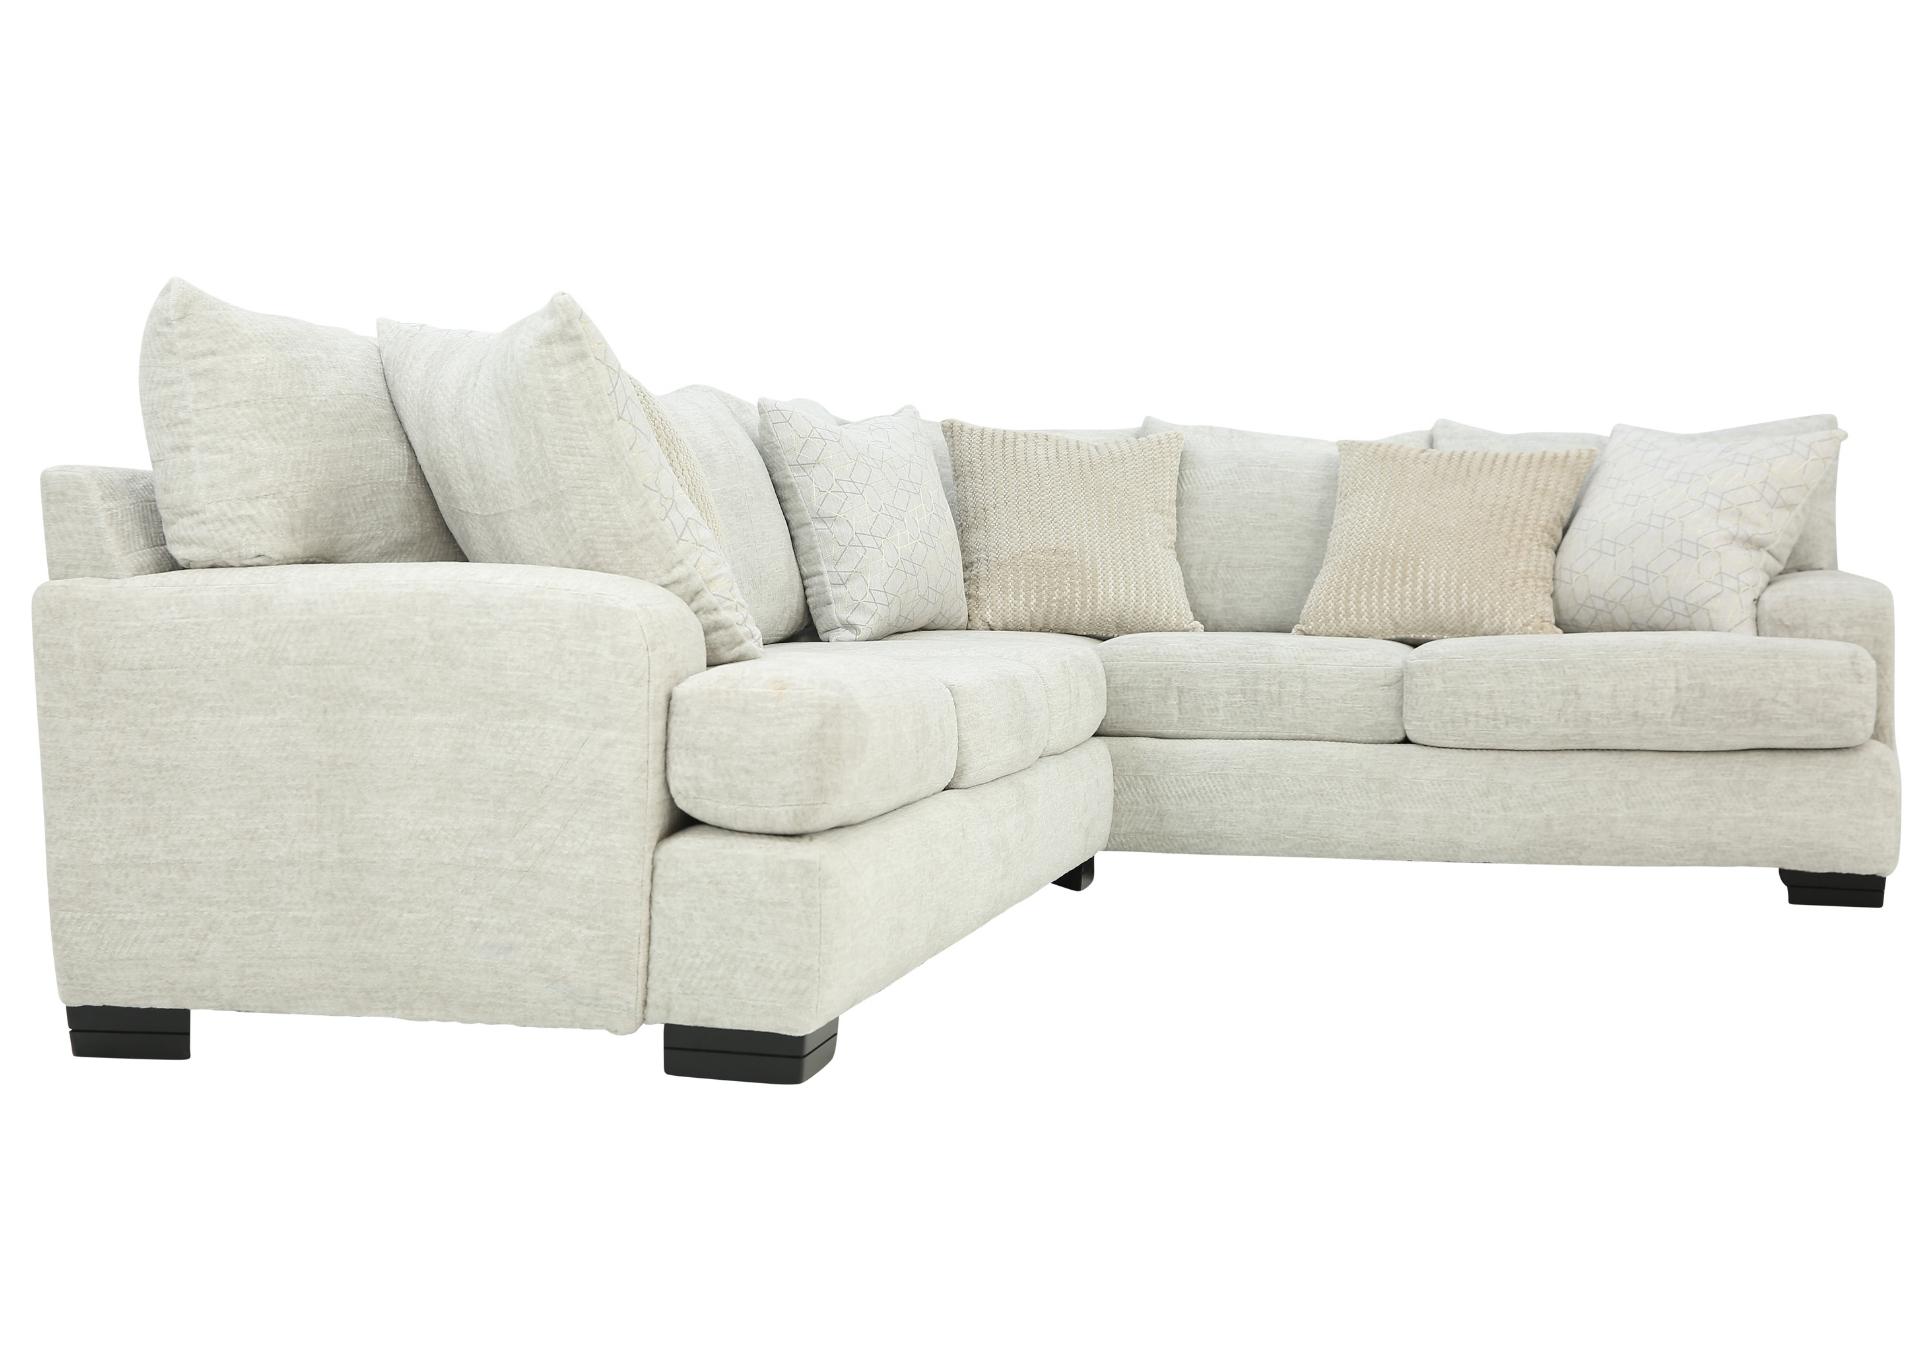 GABRIELA II PARCHMENT 2 PIECE SECTIONAL,ALBANY INDUSTRIES, INC.